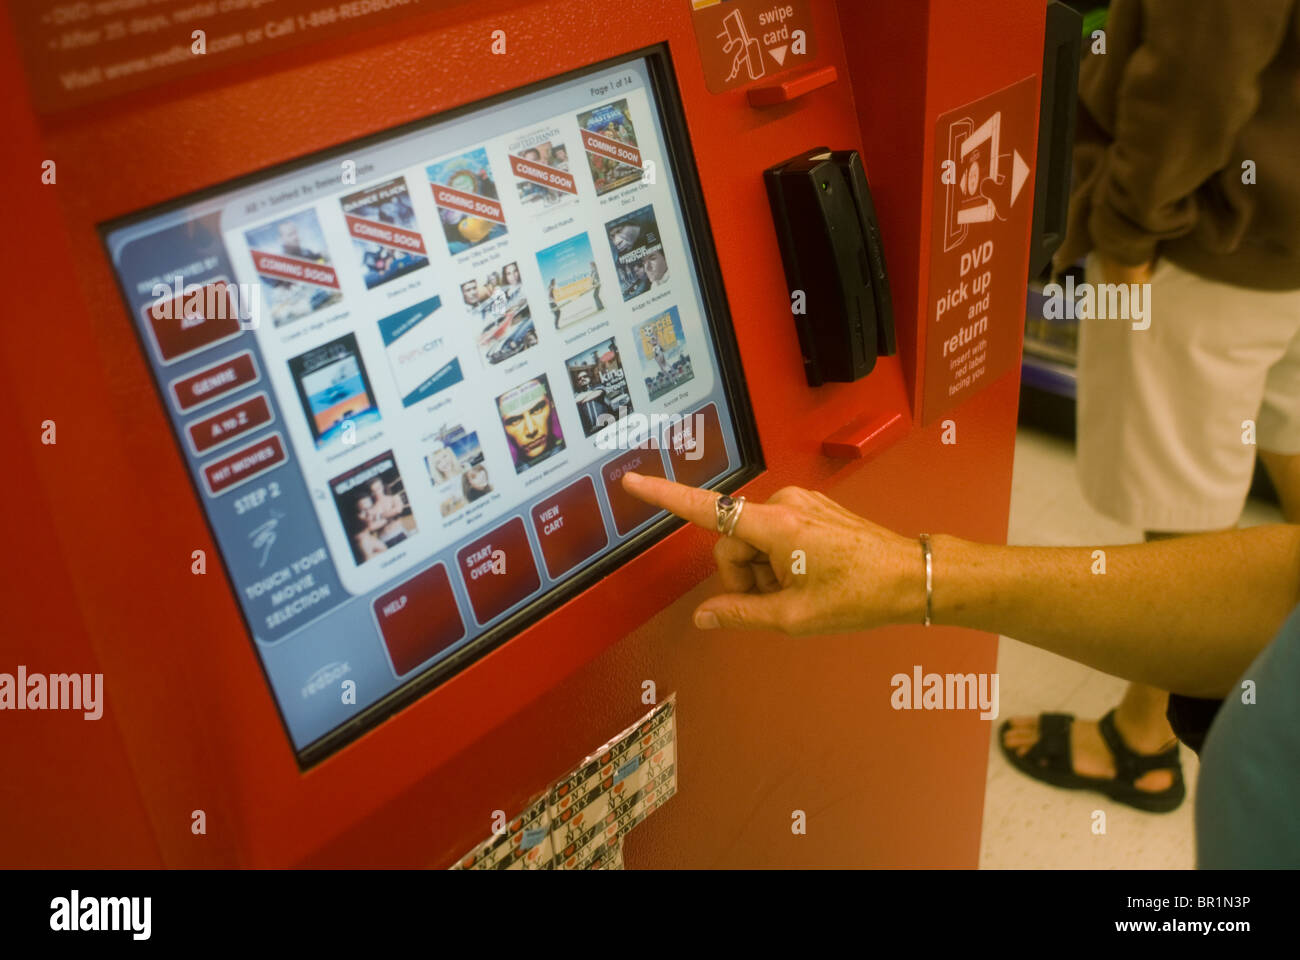 A self-service Redbox video rental kiosk is seen in a Walgreen's drug store in New York Stock Photo